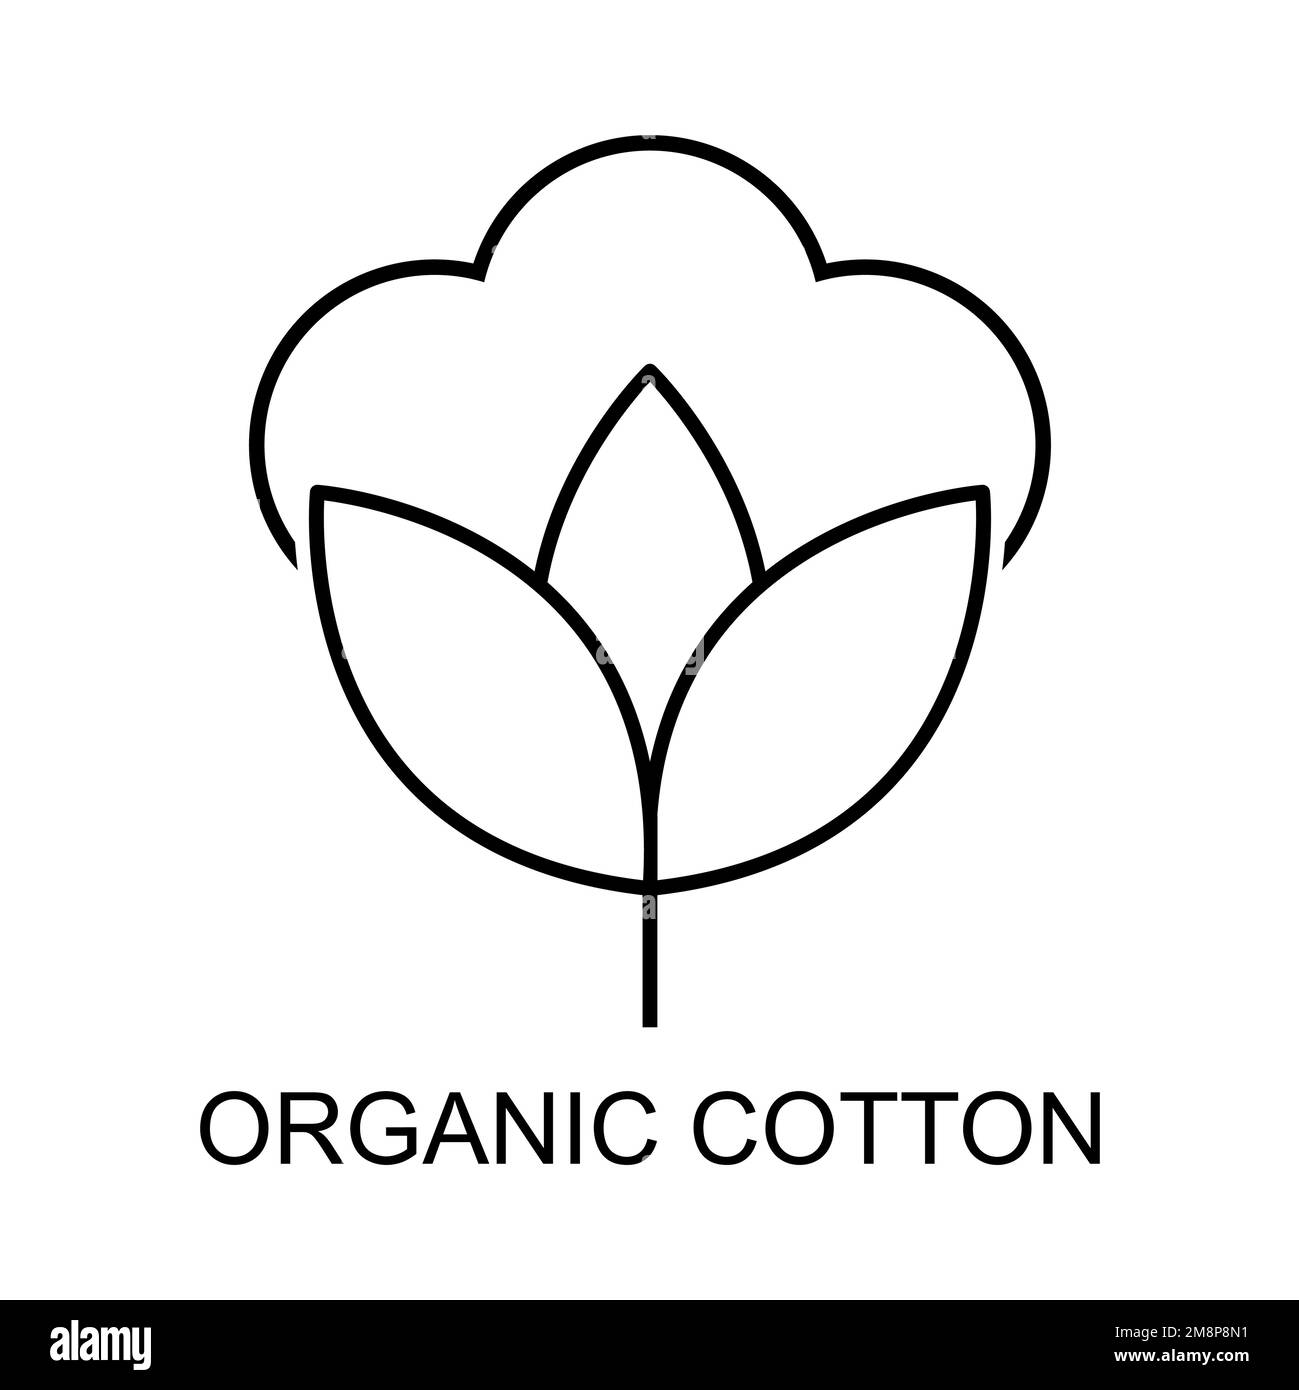 Cotton icon in a circle. Symbol for natural fabrics and ethical